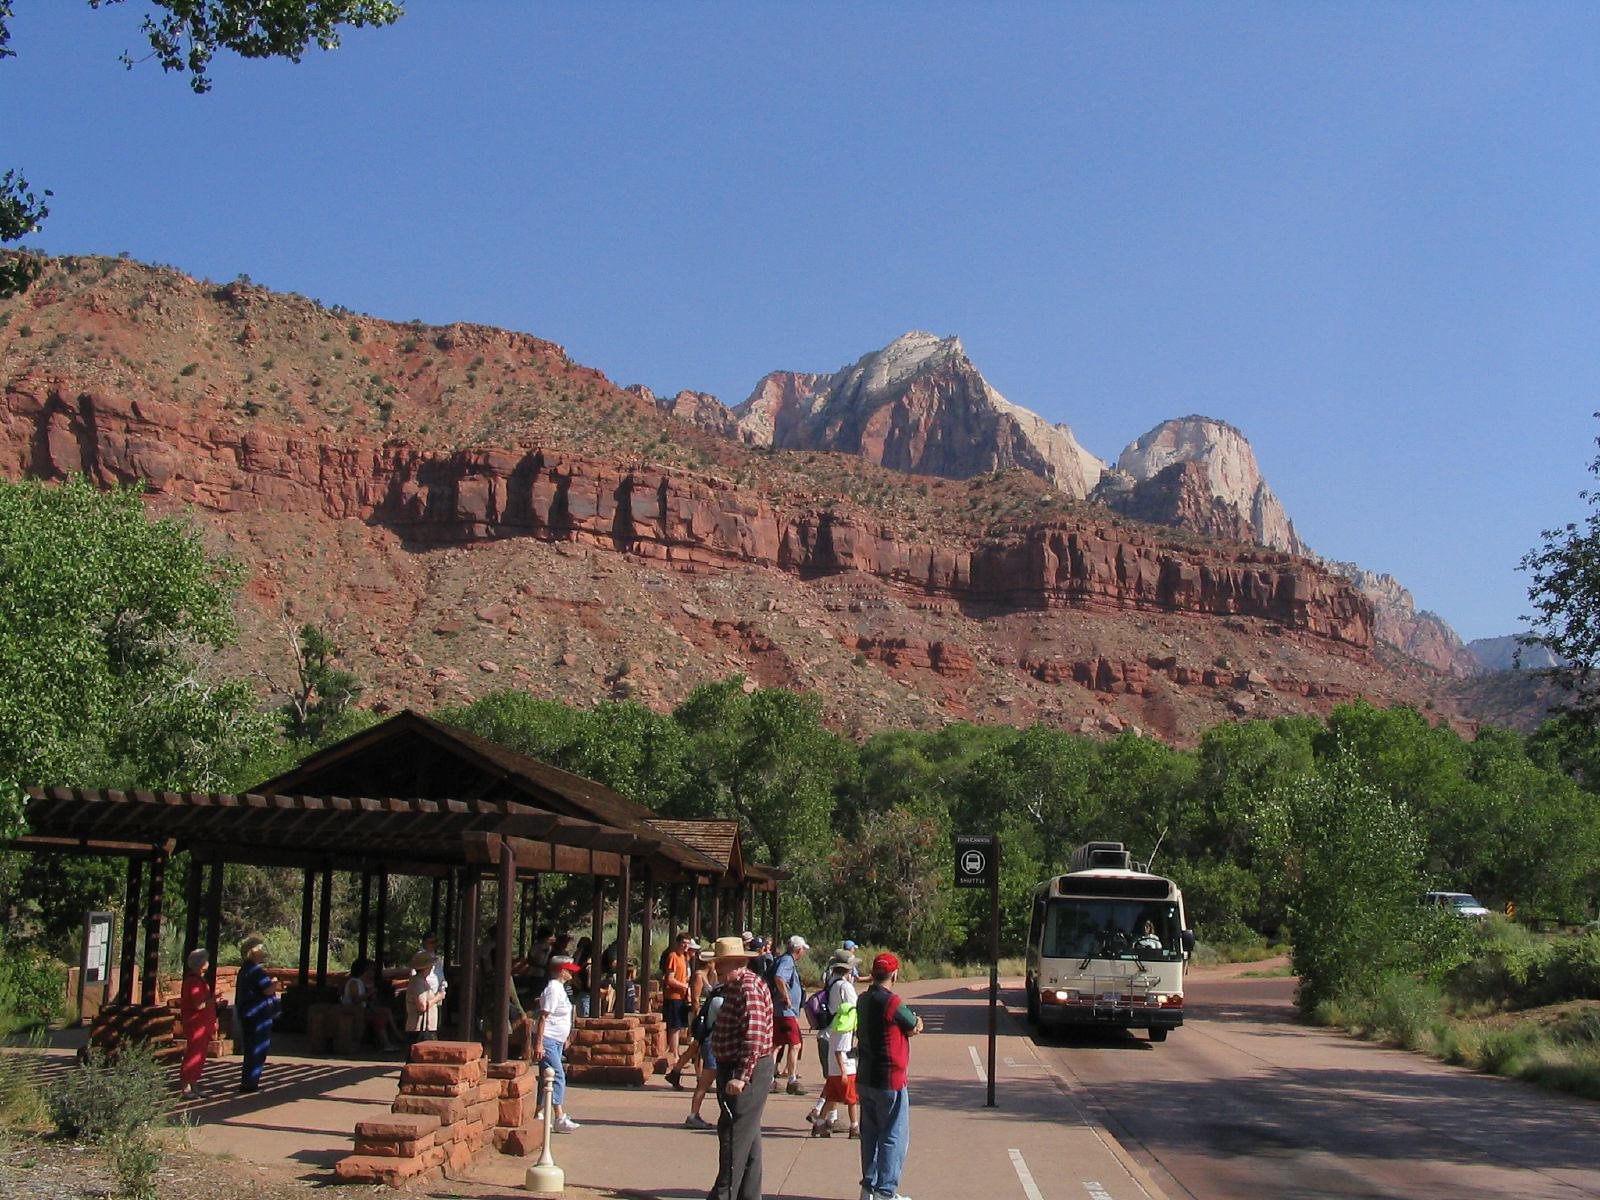 A shuttle bus waits outside the visitor center at Zion National Park, with red rock formations in the background.